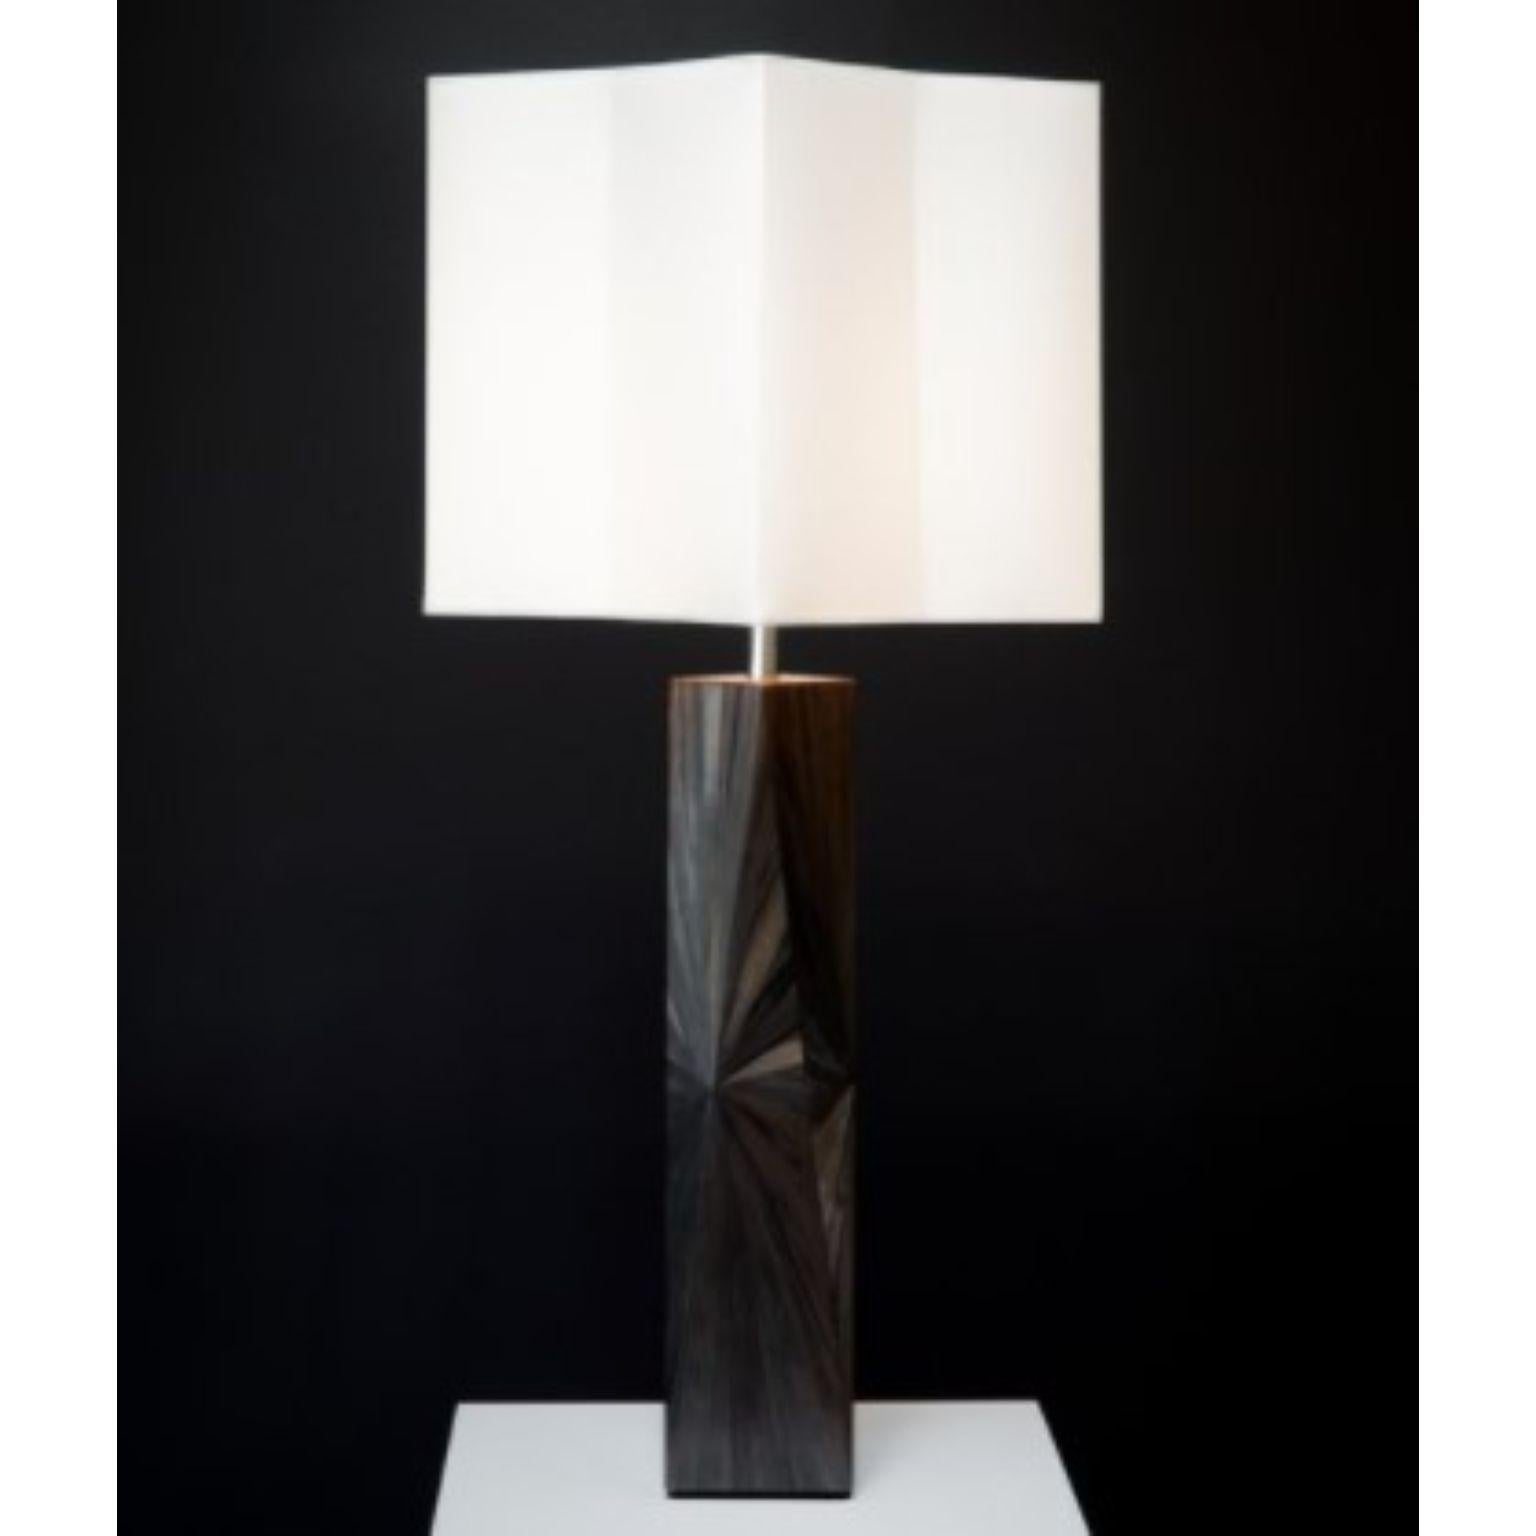 Franck black table lamp by Pierre-Axel Coulibeuf
Dimensions: W40 x D40 x H78 cm
Materials: Straw Marquetry, Nickel
Edition of 20 + 4AP
The Franck lamp is available in a variety of colors.

All our lamps can be wired according to each country.